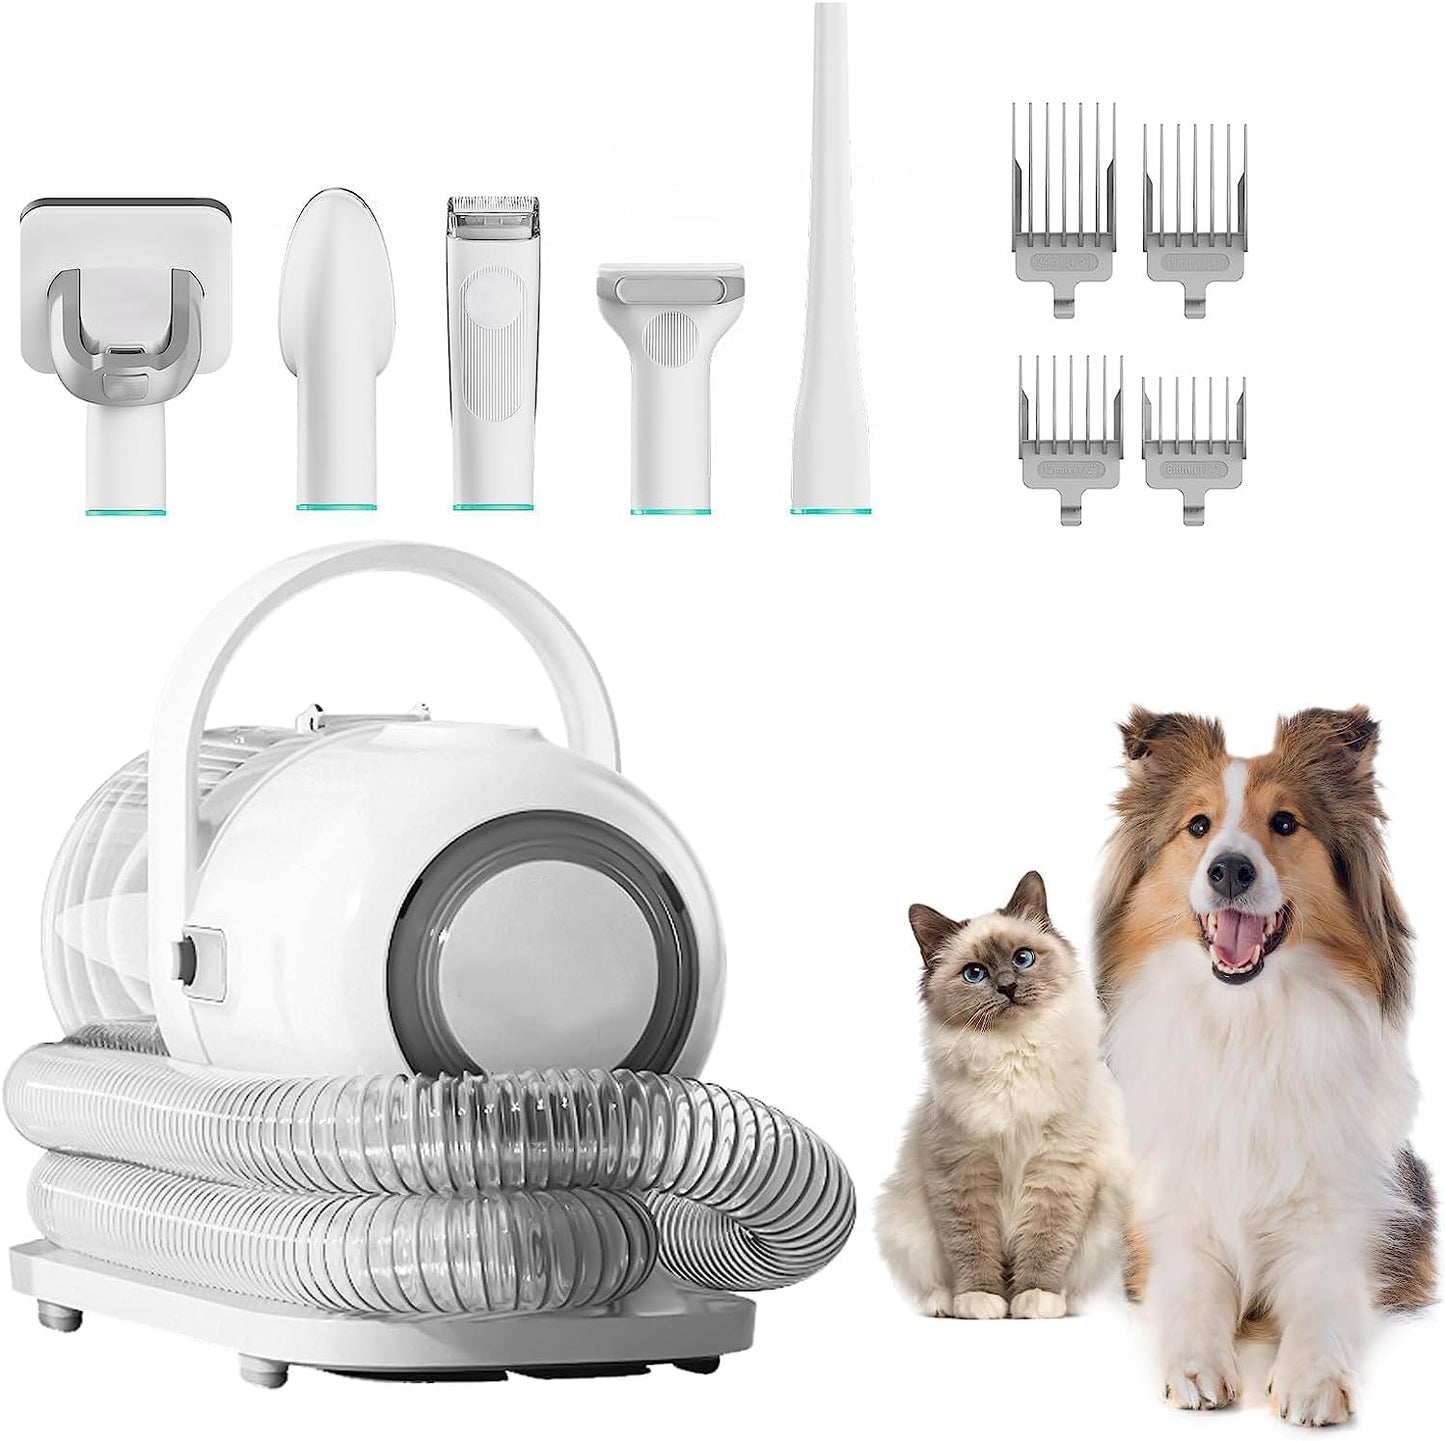 P1 Pro Pet Grooming Kit & Vacuum Suction - Buy P1 Pro Pet Grooming Kit & Vacuum Suction in Dubai - HOCC Dubai - Baby playground outdoor - Shop baby product - Shop Pet product - shop home decor and lighting in Dubai - HOCC Dubai - Baby playground outddoor 